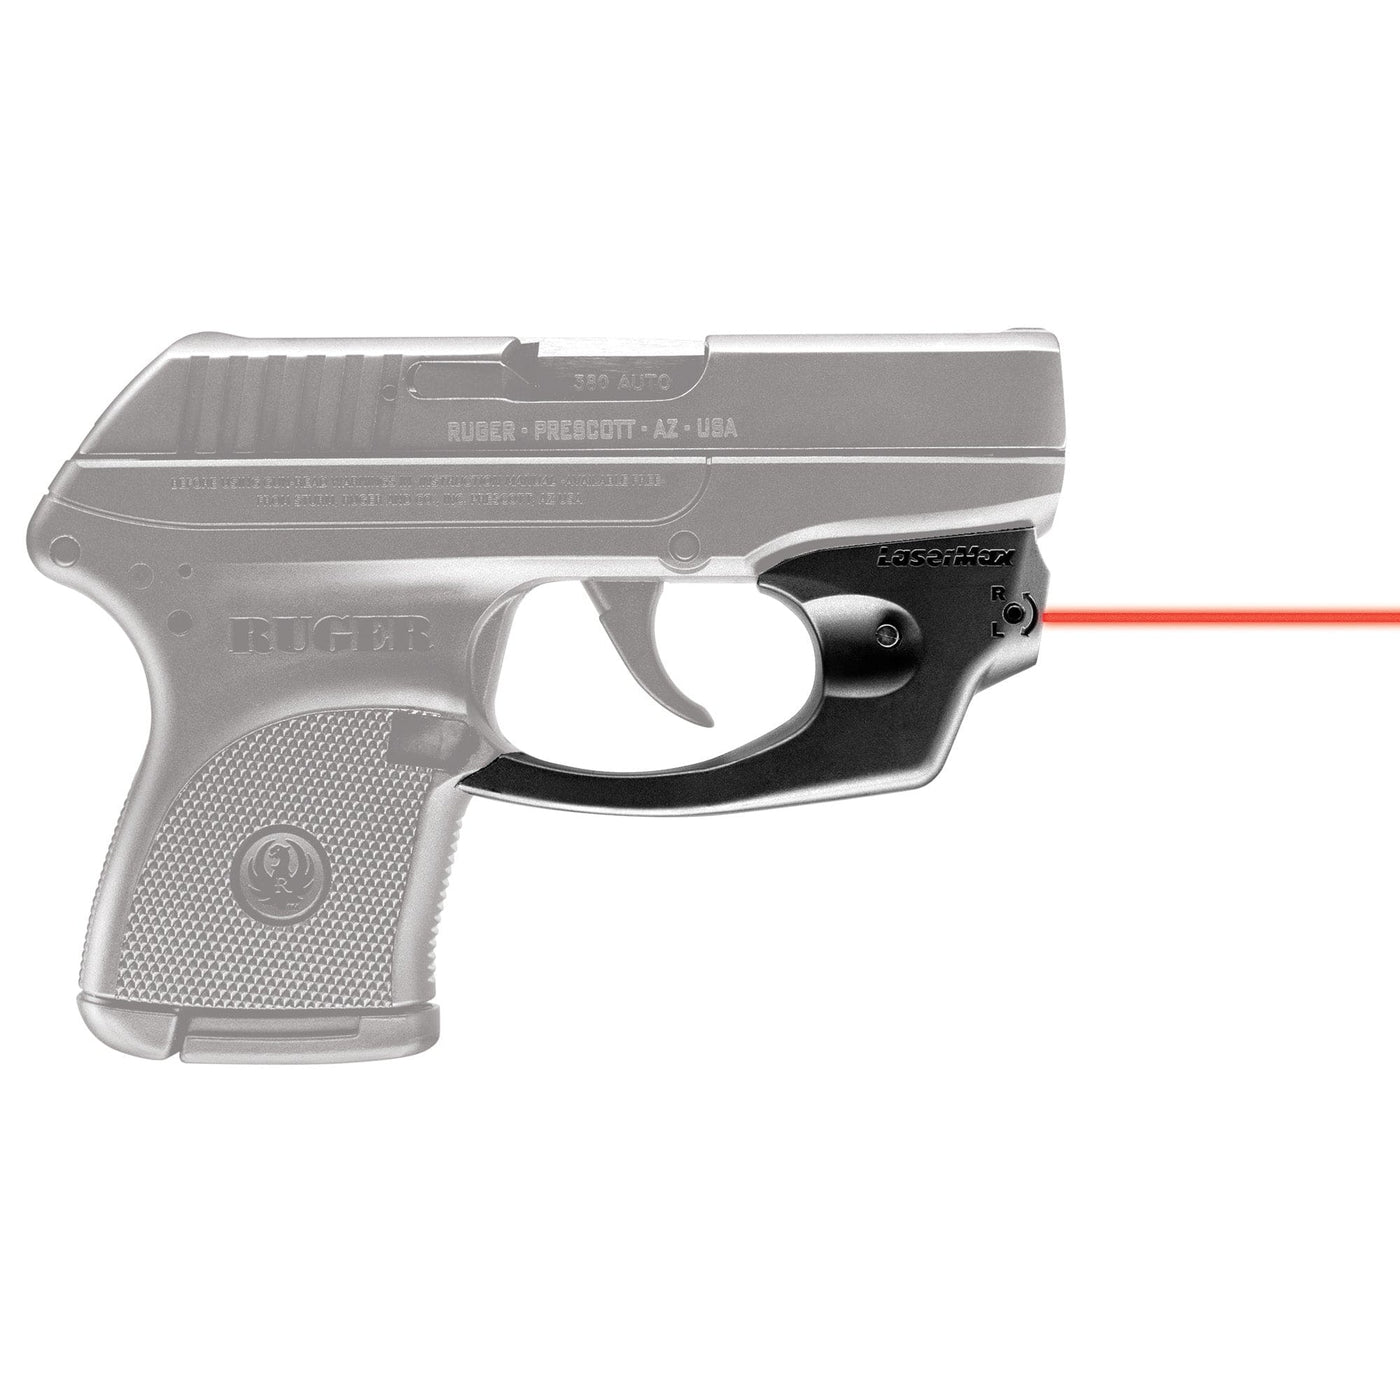 LaserMax LaserMax Centerfire Laser Red Ruger LCP Optics And Sights